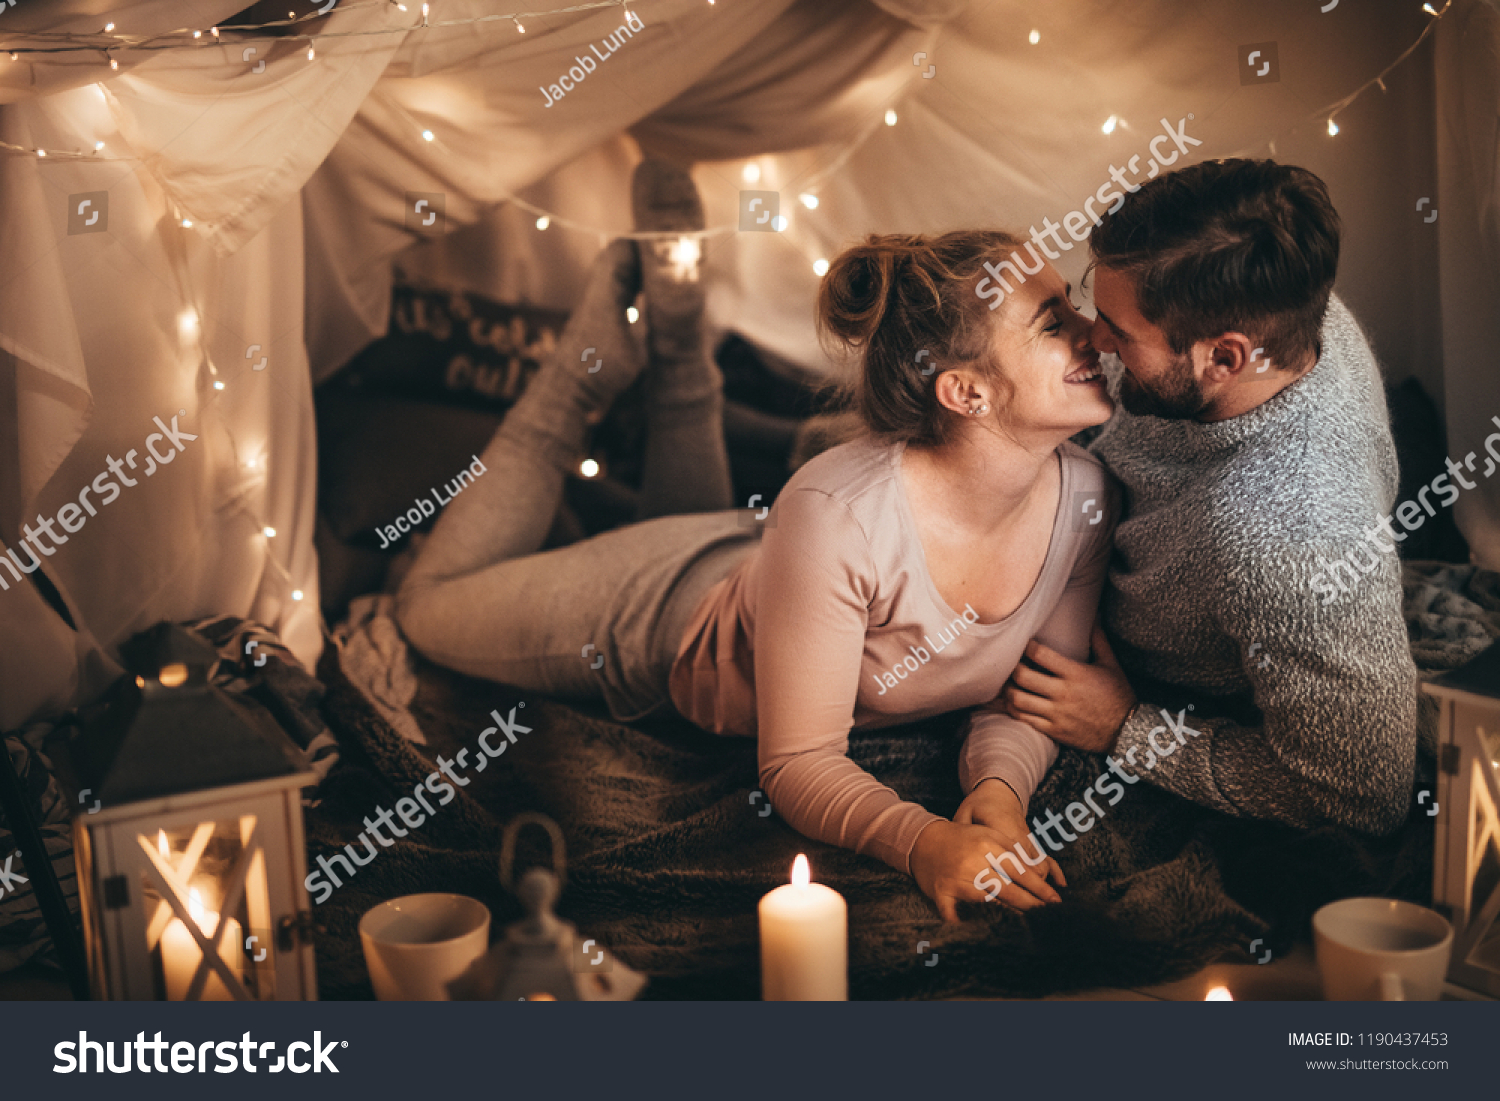 Couple together on bed in a room decorated with candle lights and tiny serial light bulbs. Smiling woman spending happy time with her husband in bedroom. #1190437453